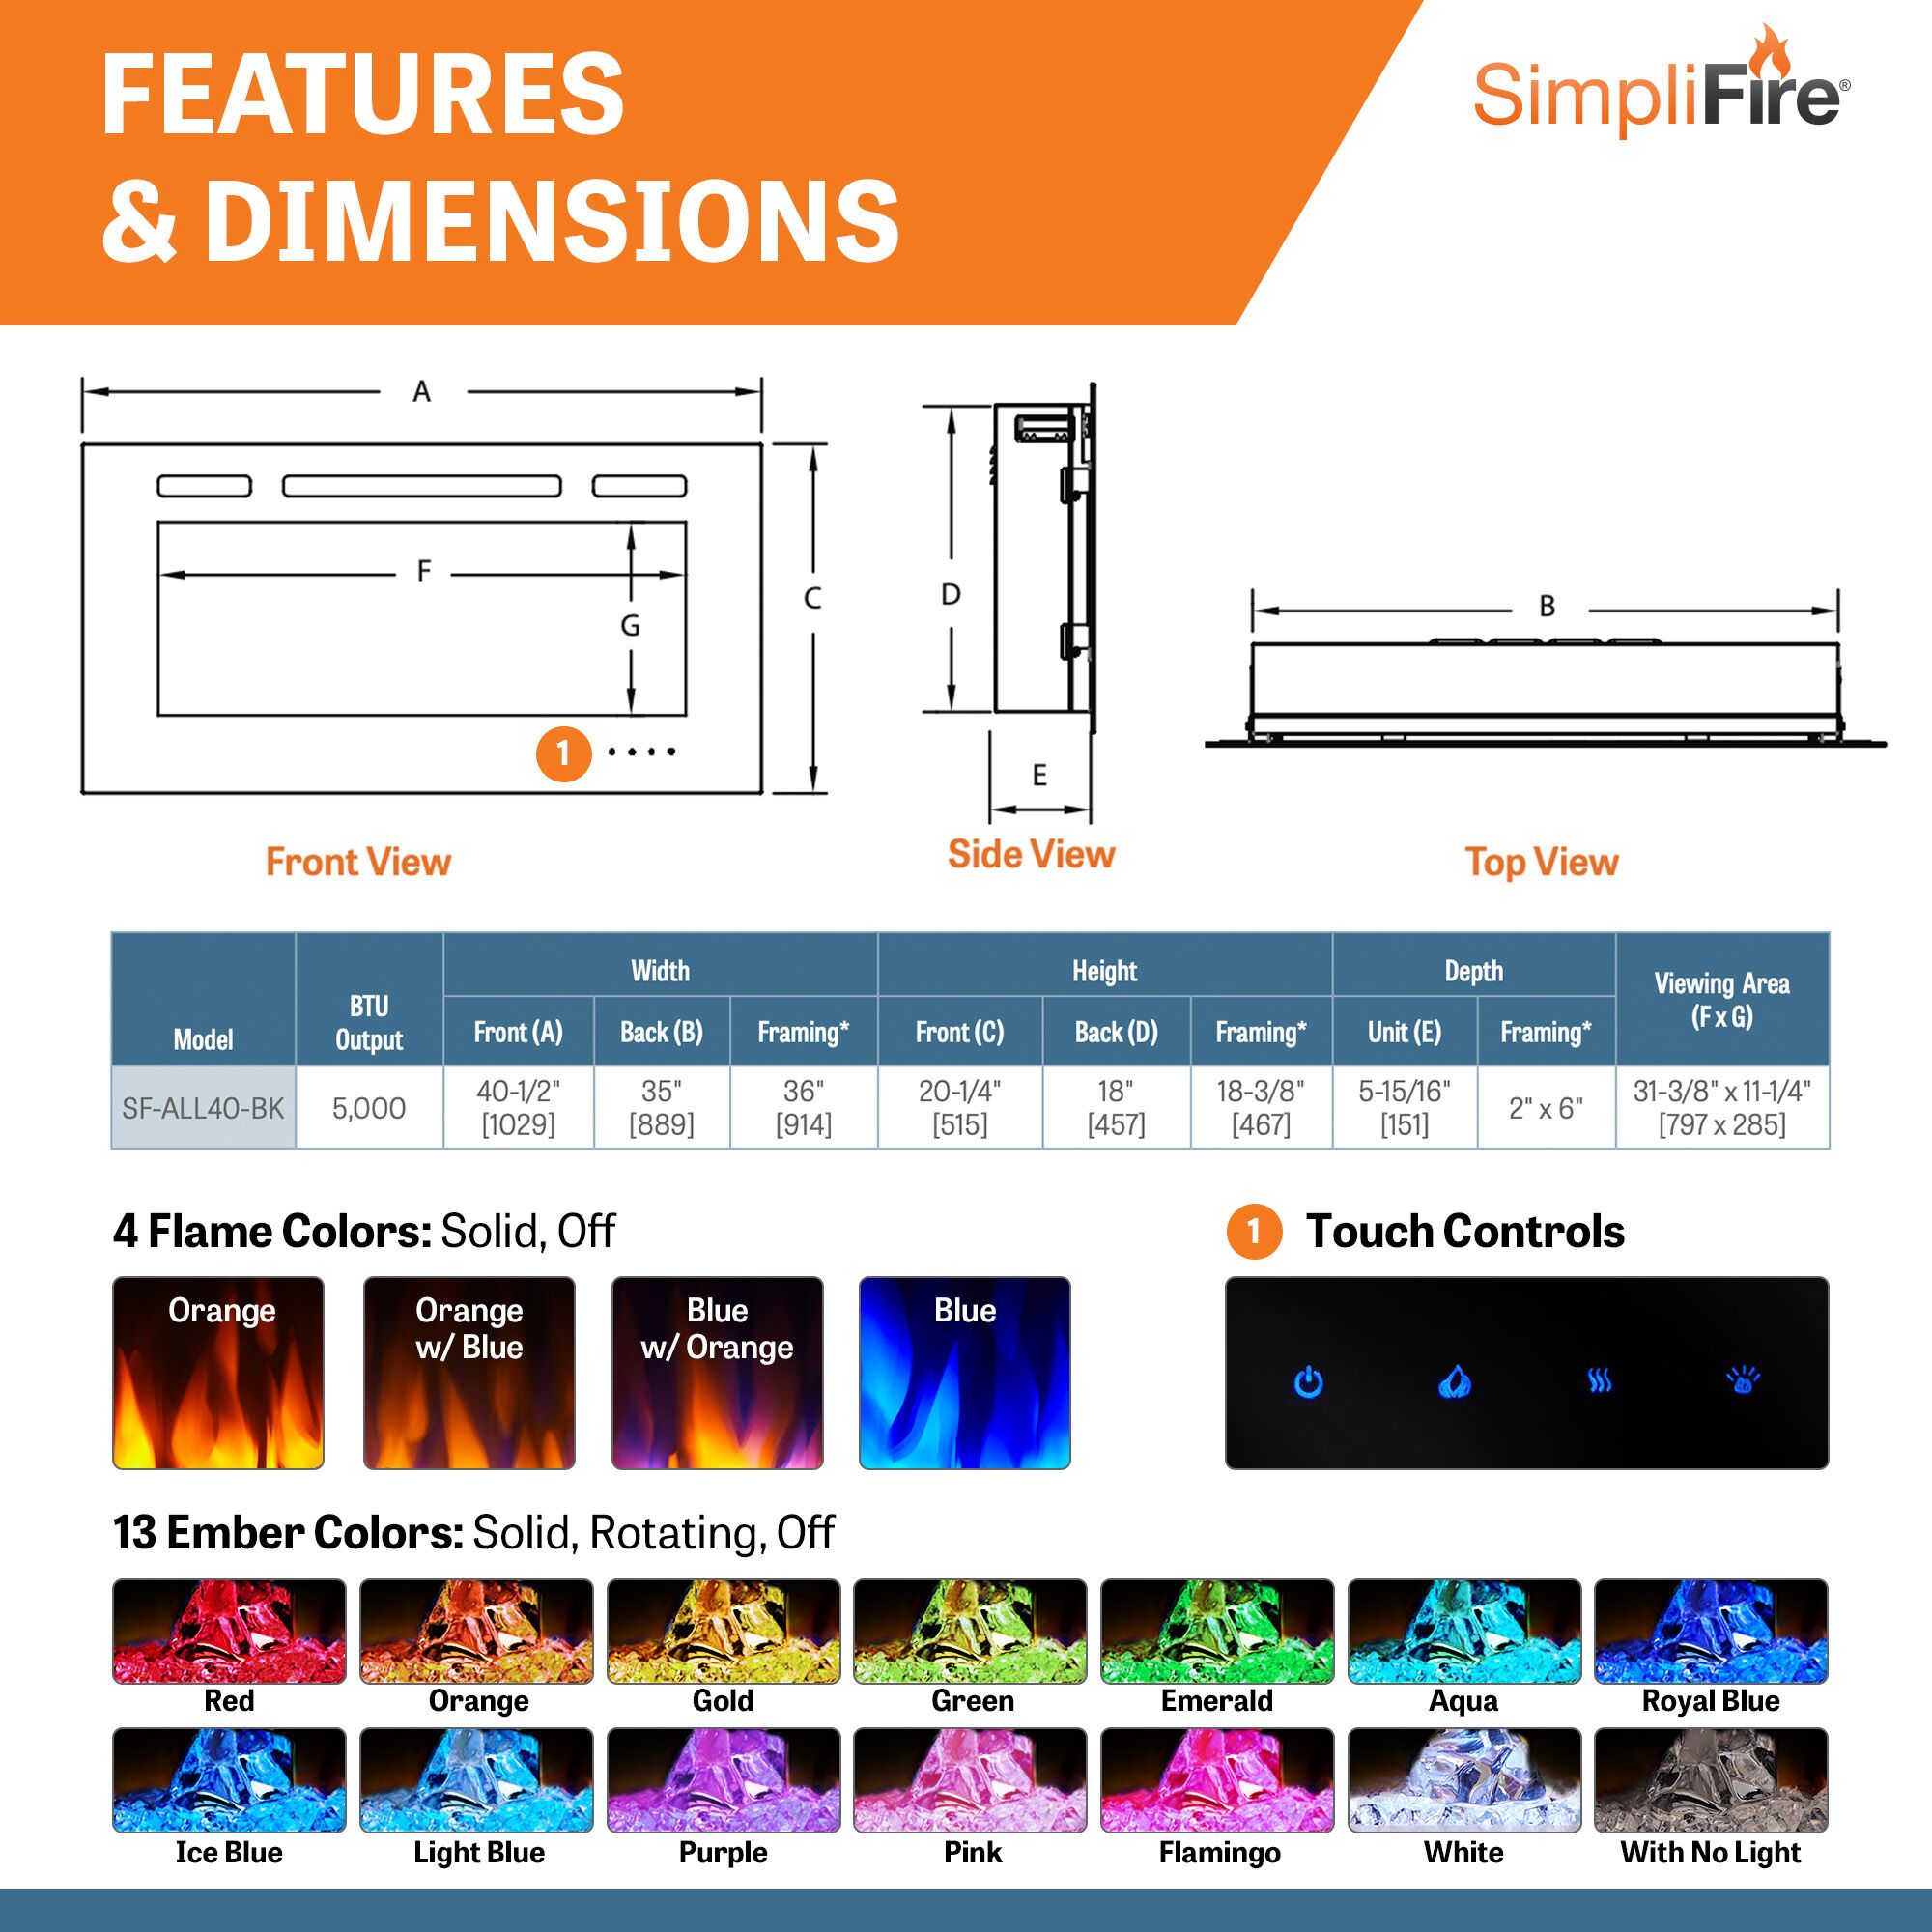 40 inch allusion linear electric fireplace thumbnail image